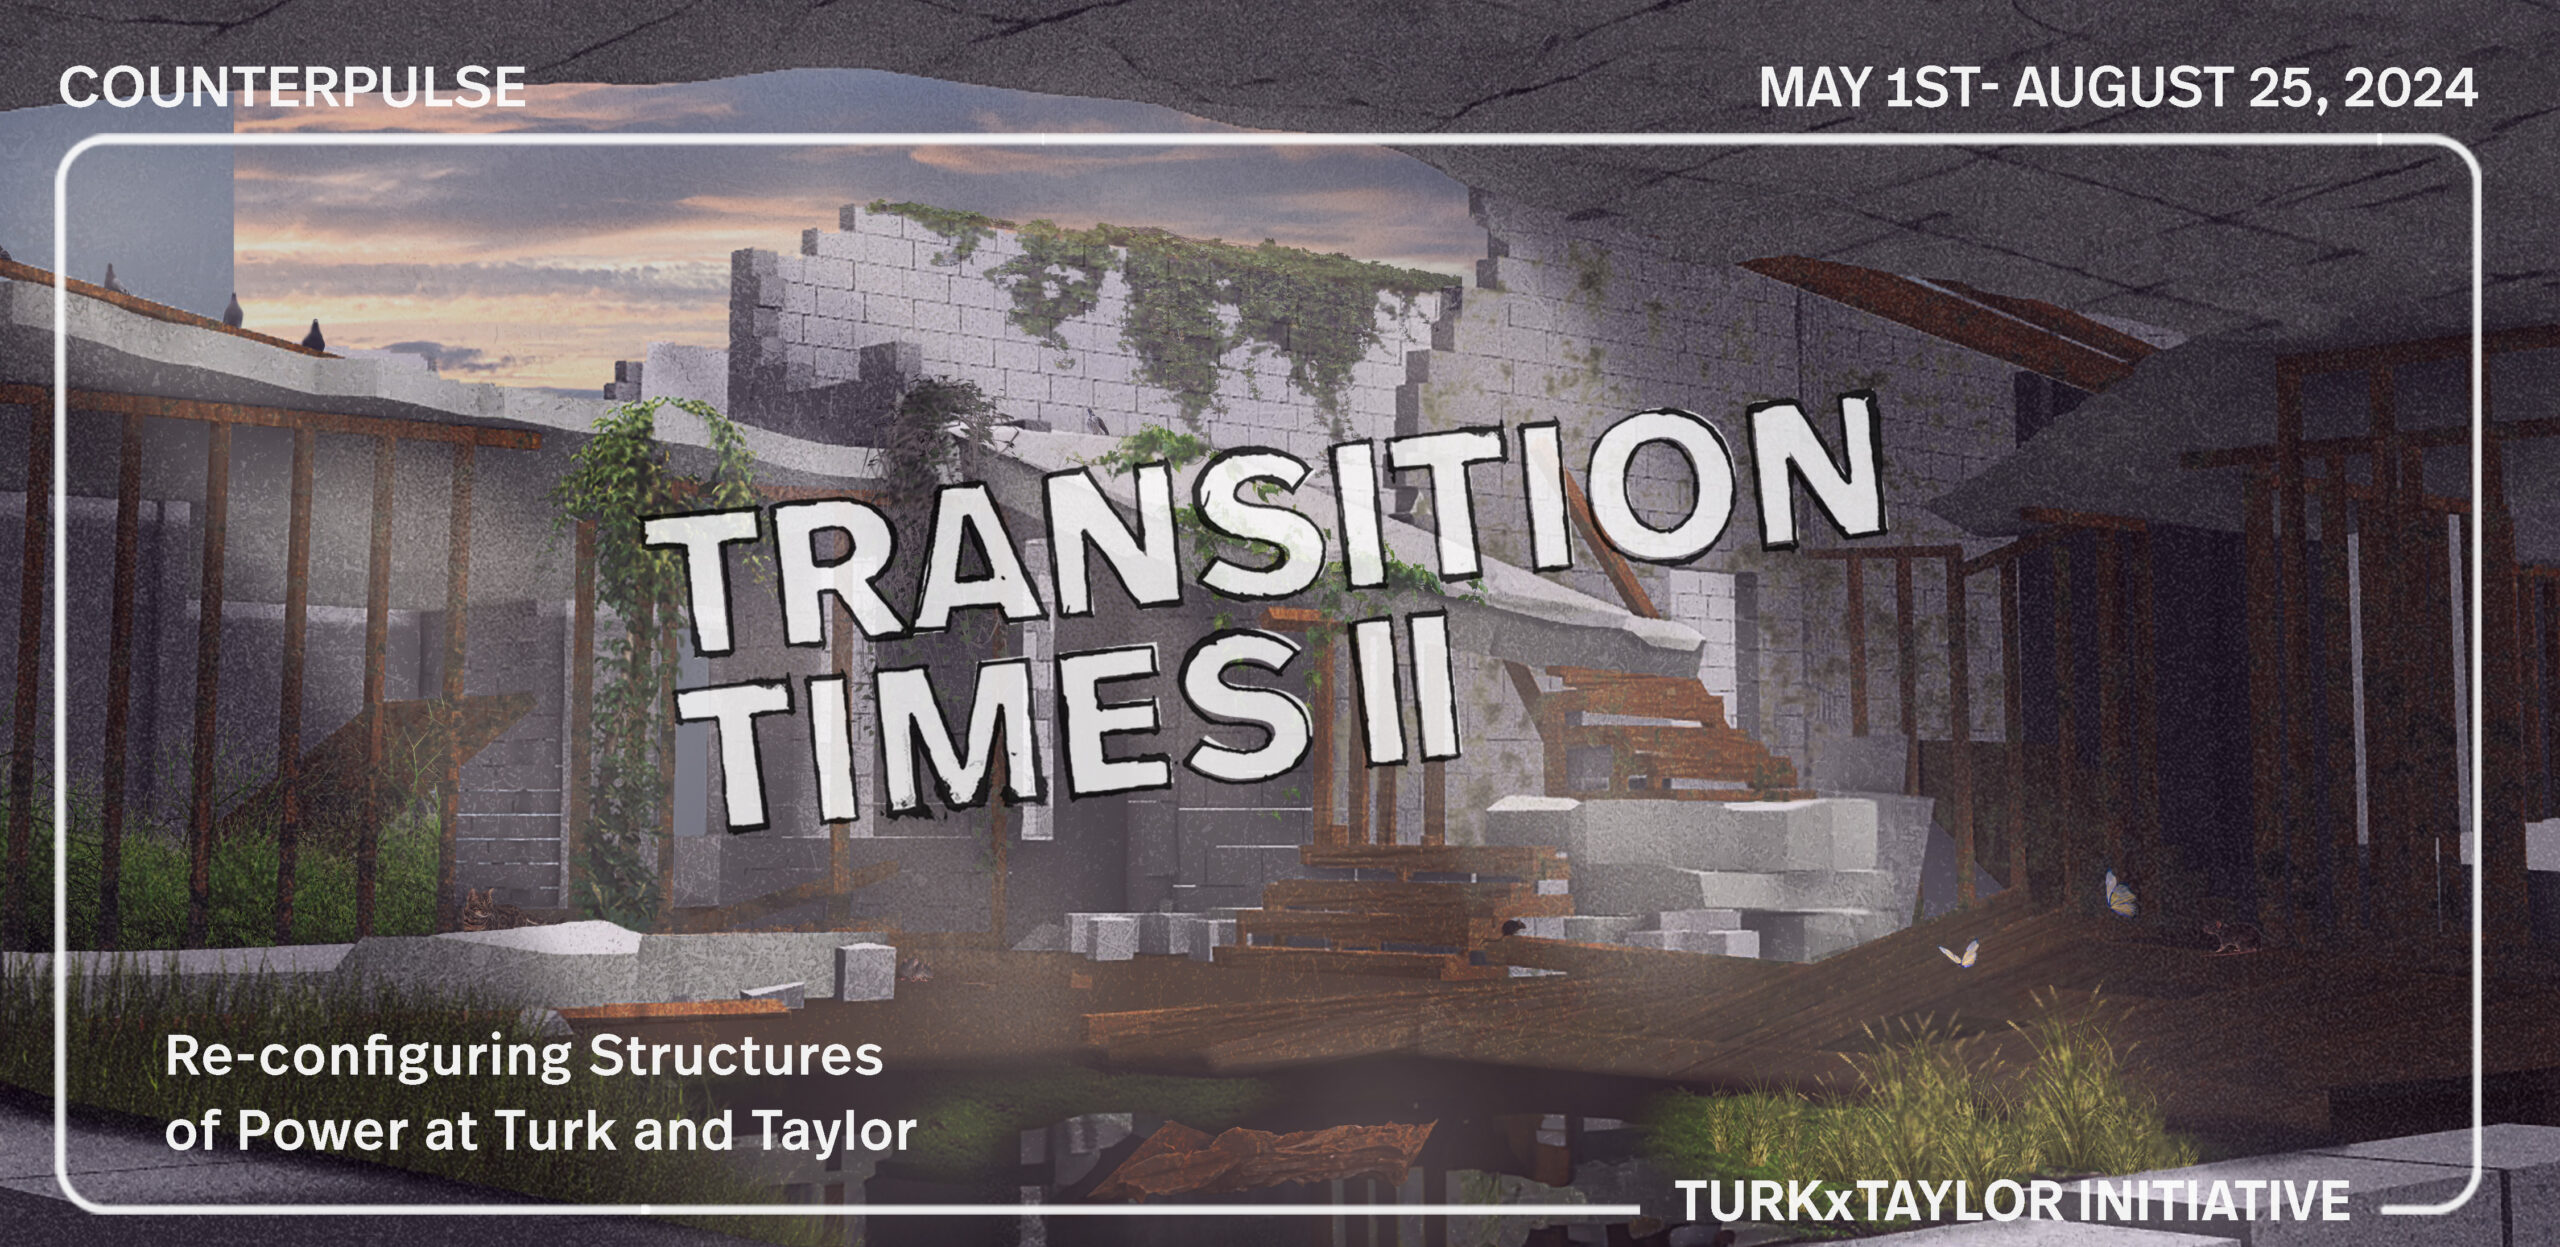 A promotional image for TurkxTaylor exhibition “Transition Times Part II Reconfiguring Structures of Power at Turk and Taylor” at CounterPulse May 1 to August 25, 2024. “Within an artfully rendered deconstructed building, nature grows on dilapidated walls and abandoned floors as sunlight shines through a gaping hole in the ceiling, exposing a cloudy sunset”